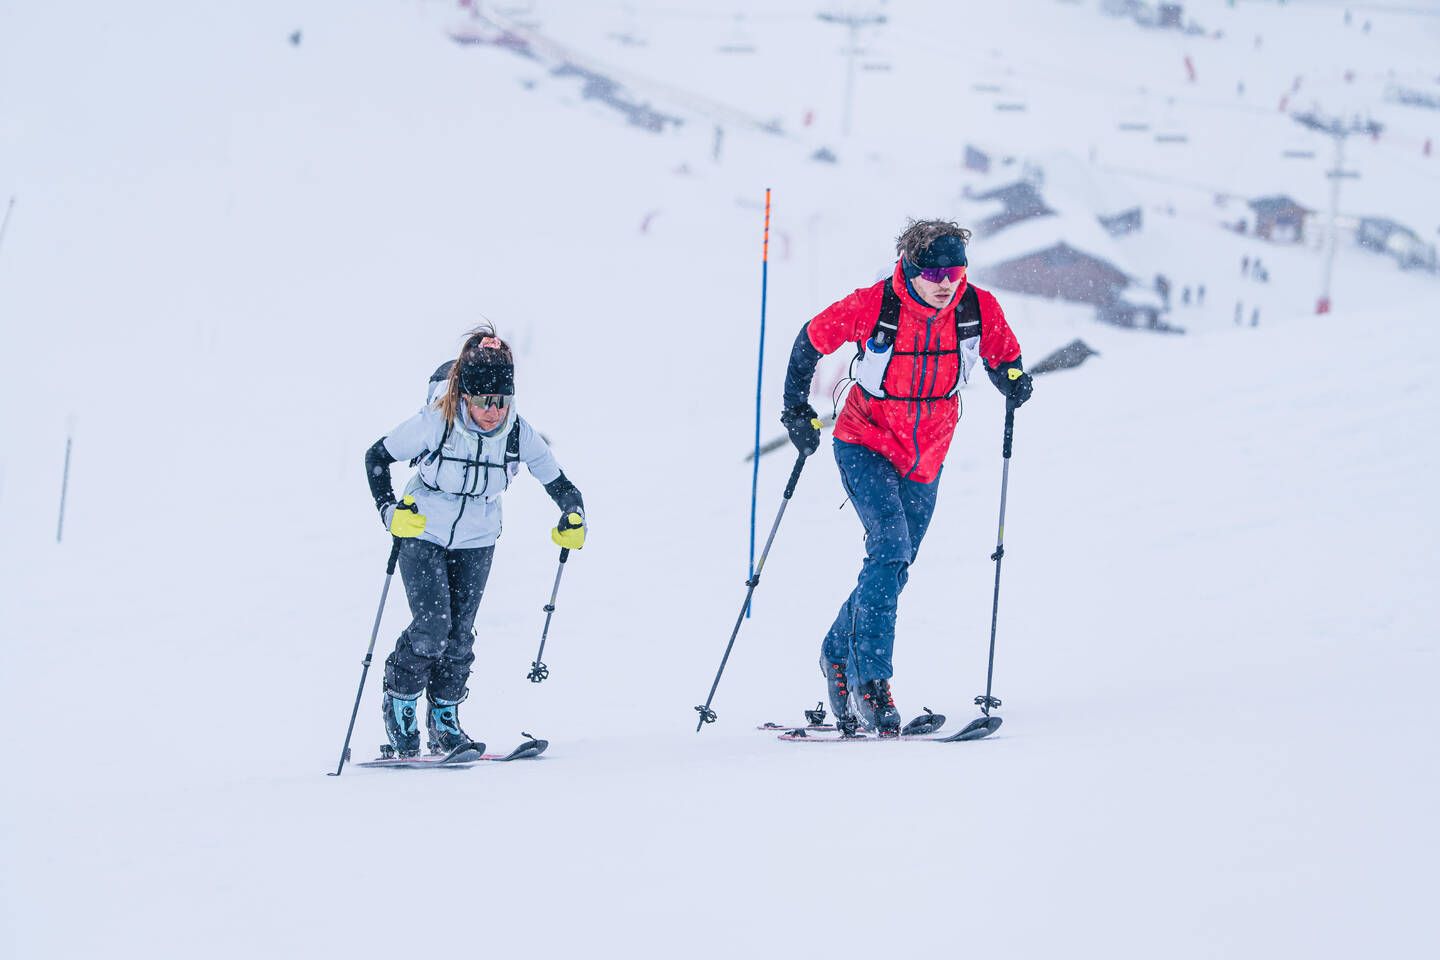 DECATHLON_Skitouren-Outfit Pacer_Image